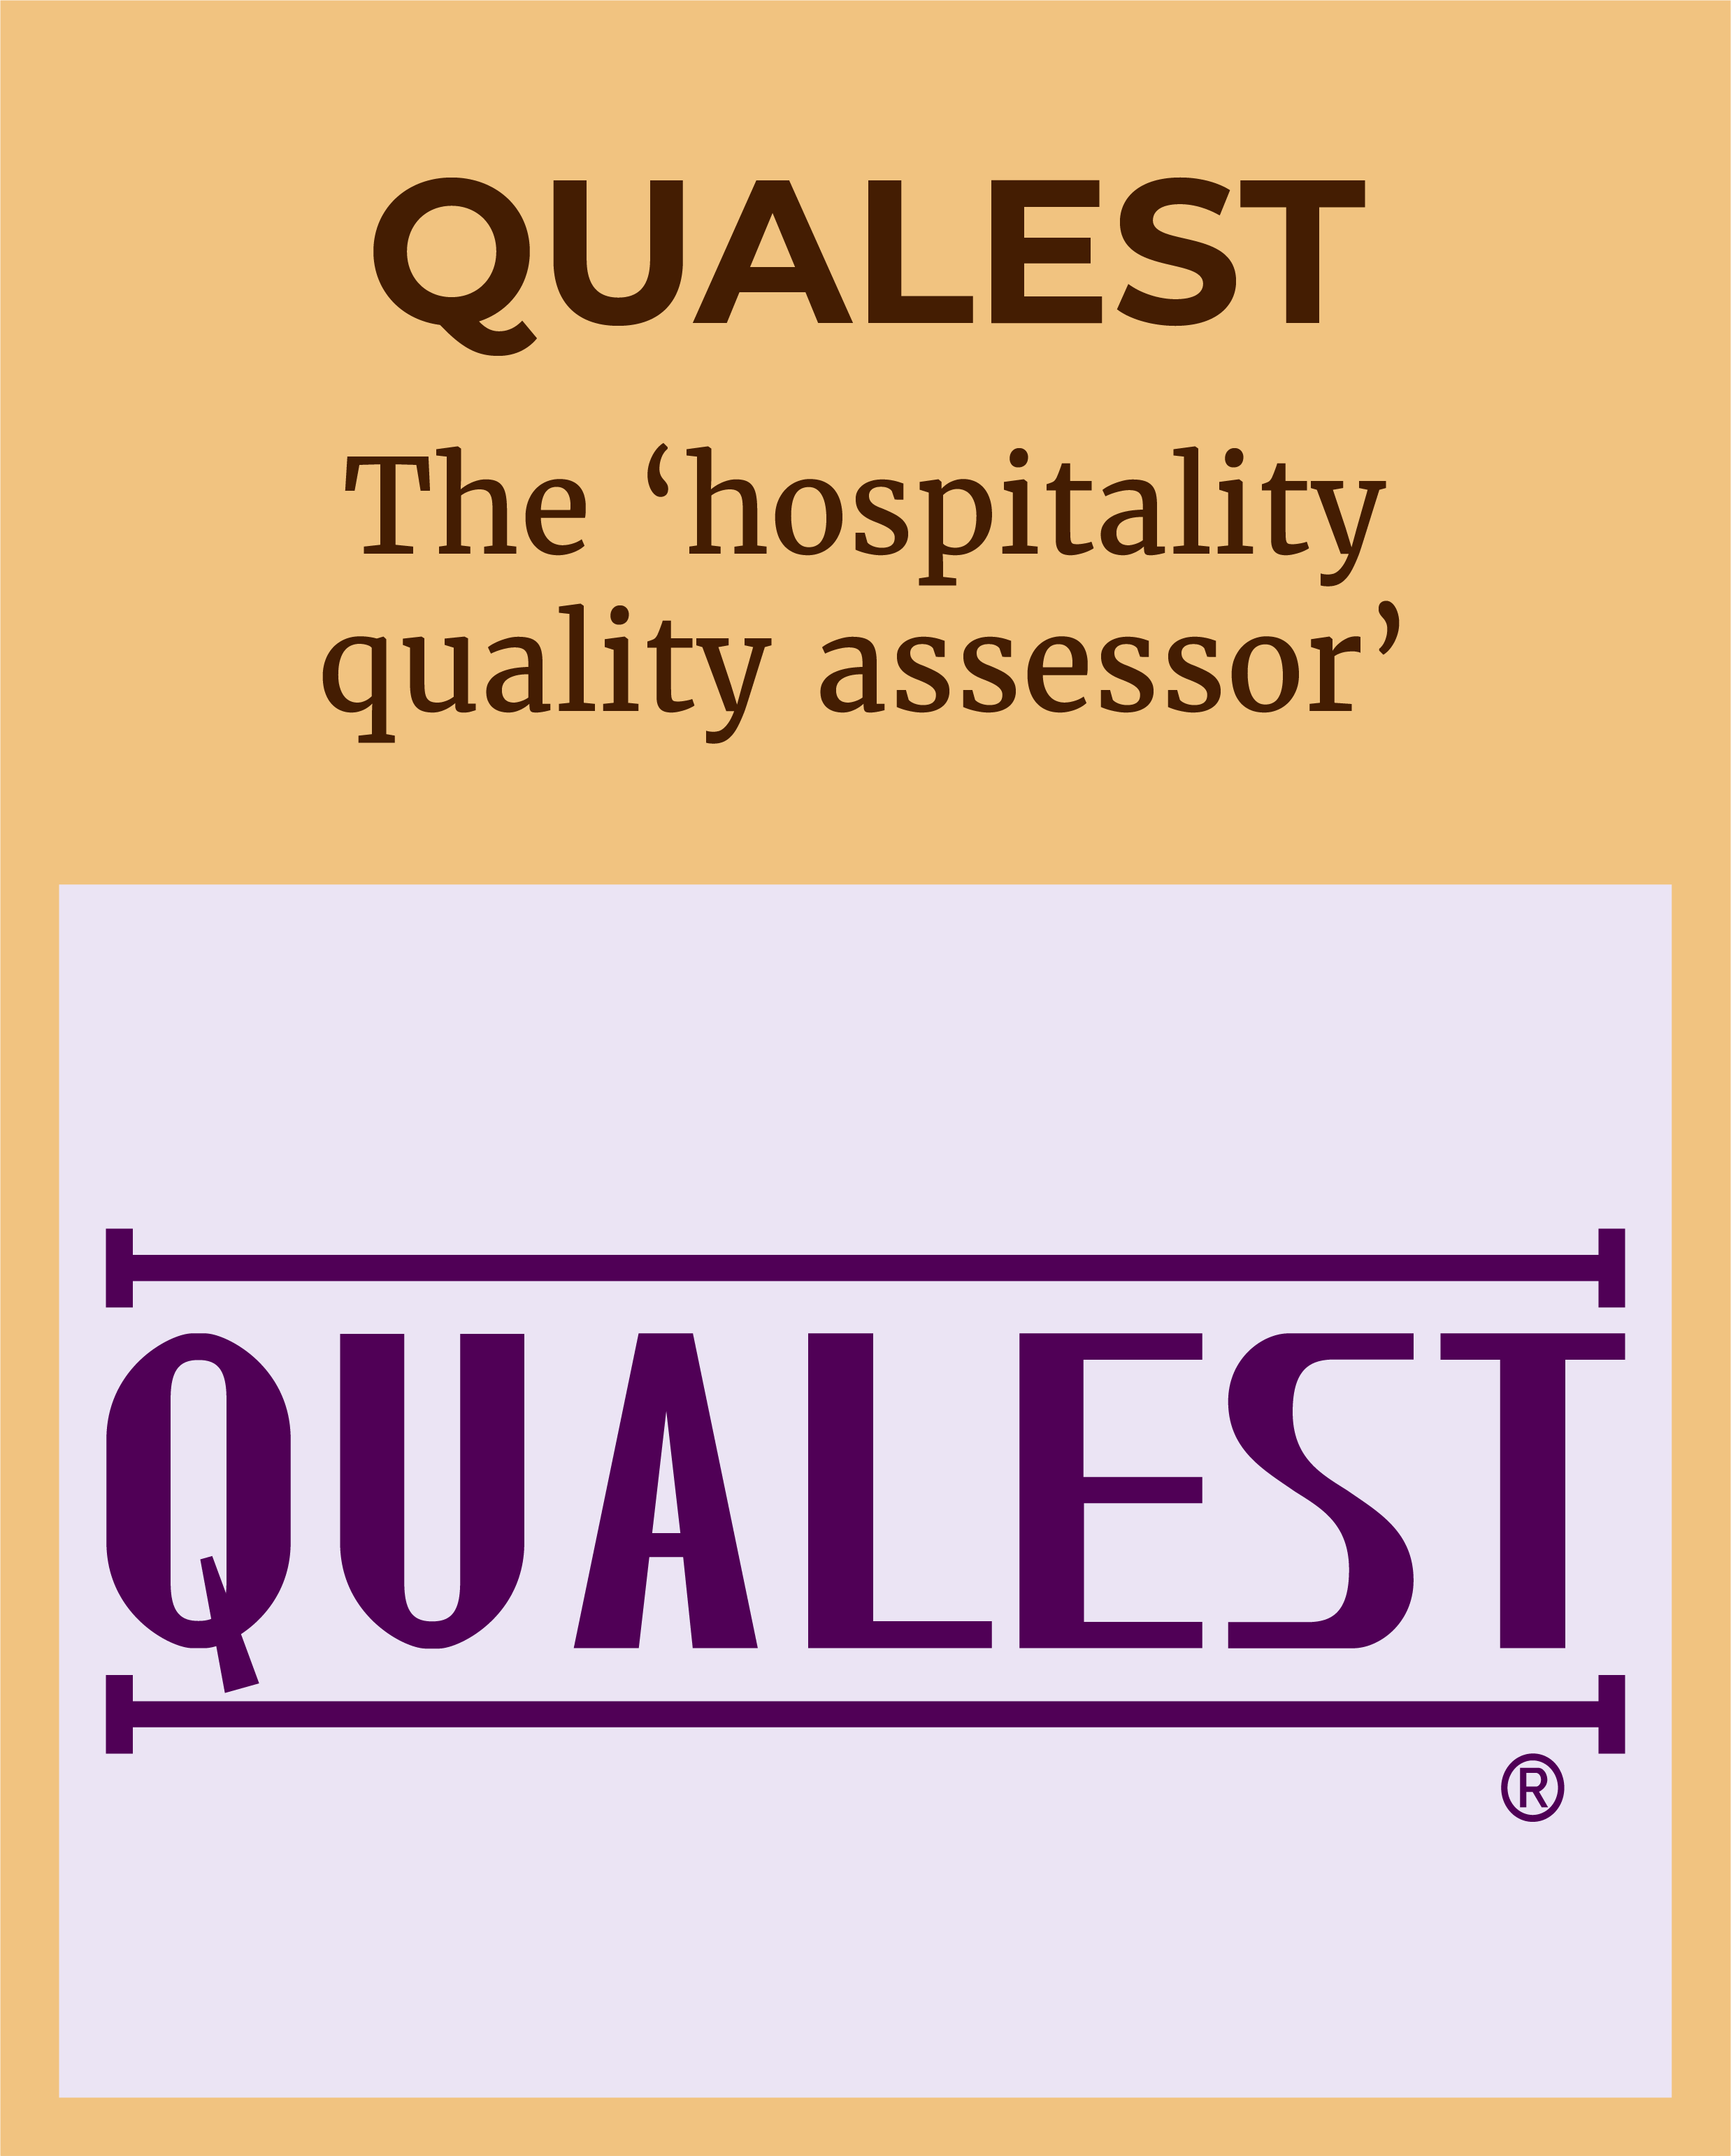 Logo of QUALEST - the research product that is the 'hospitality quality measure'